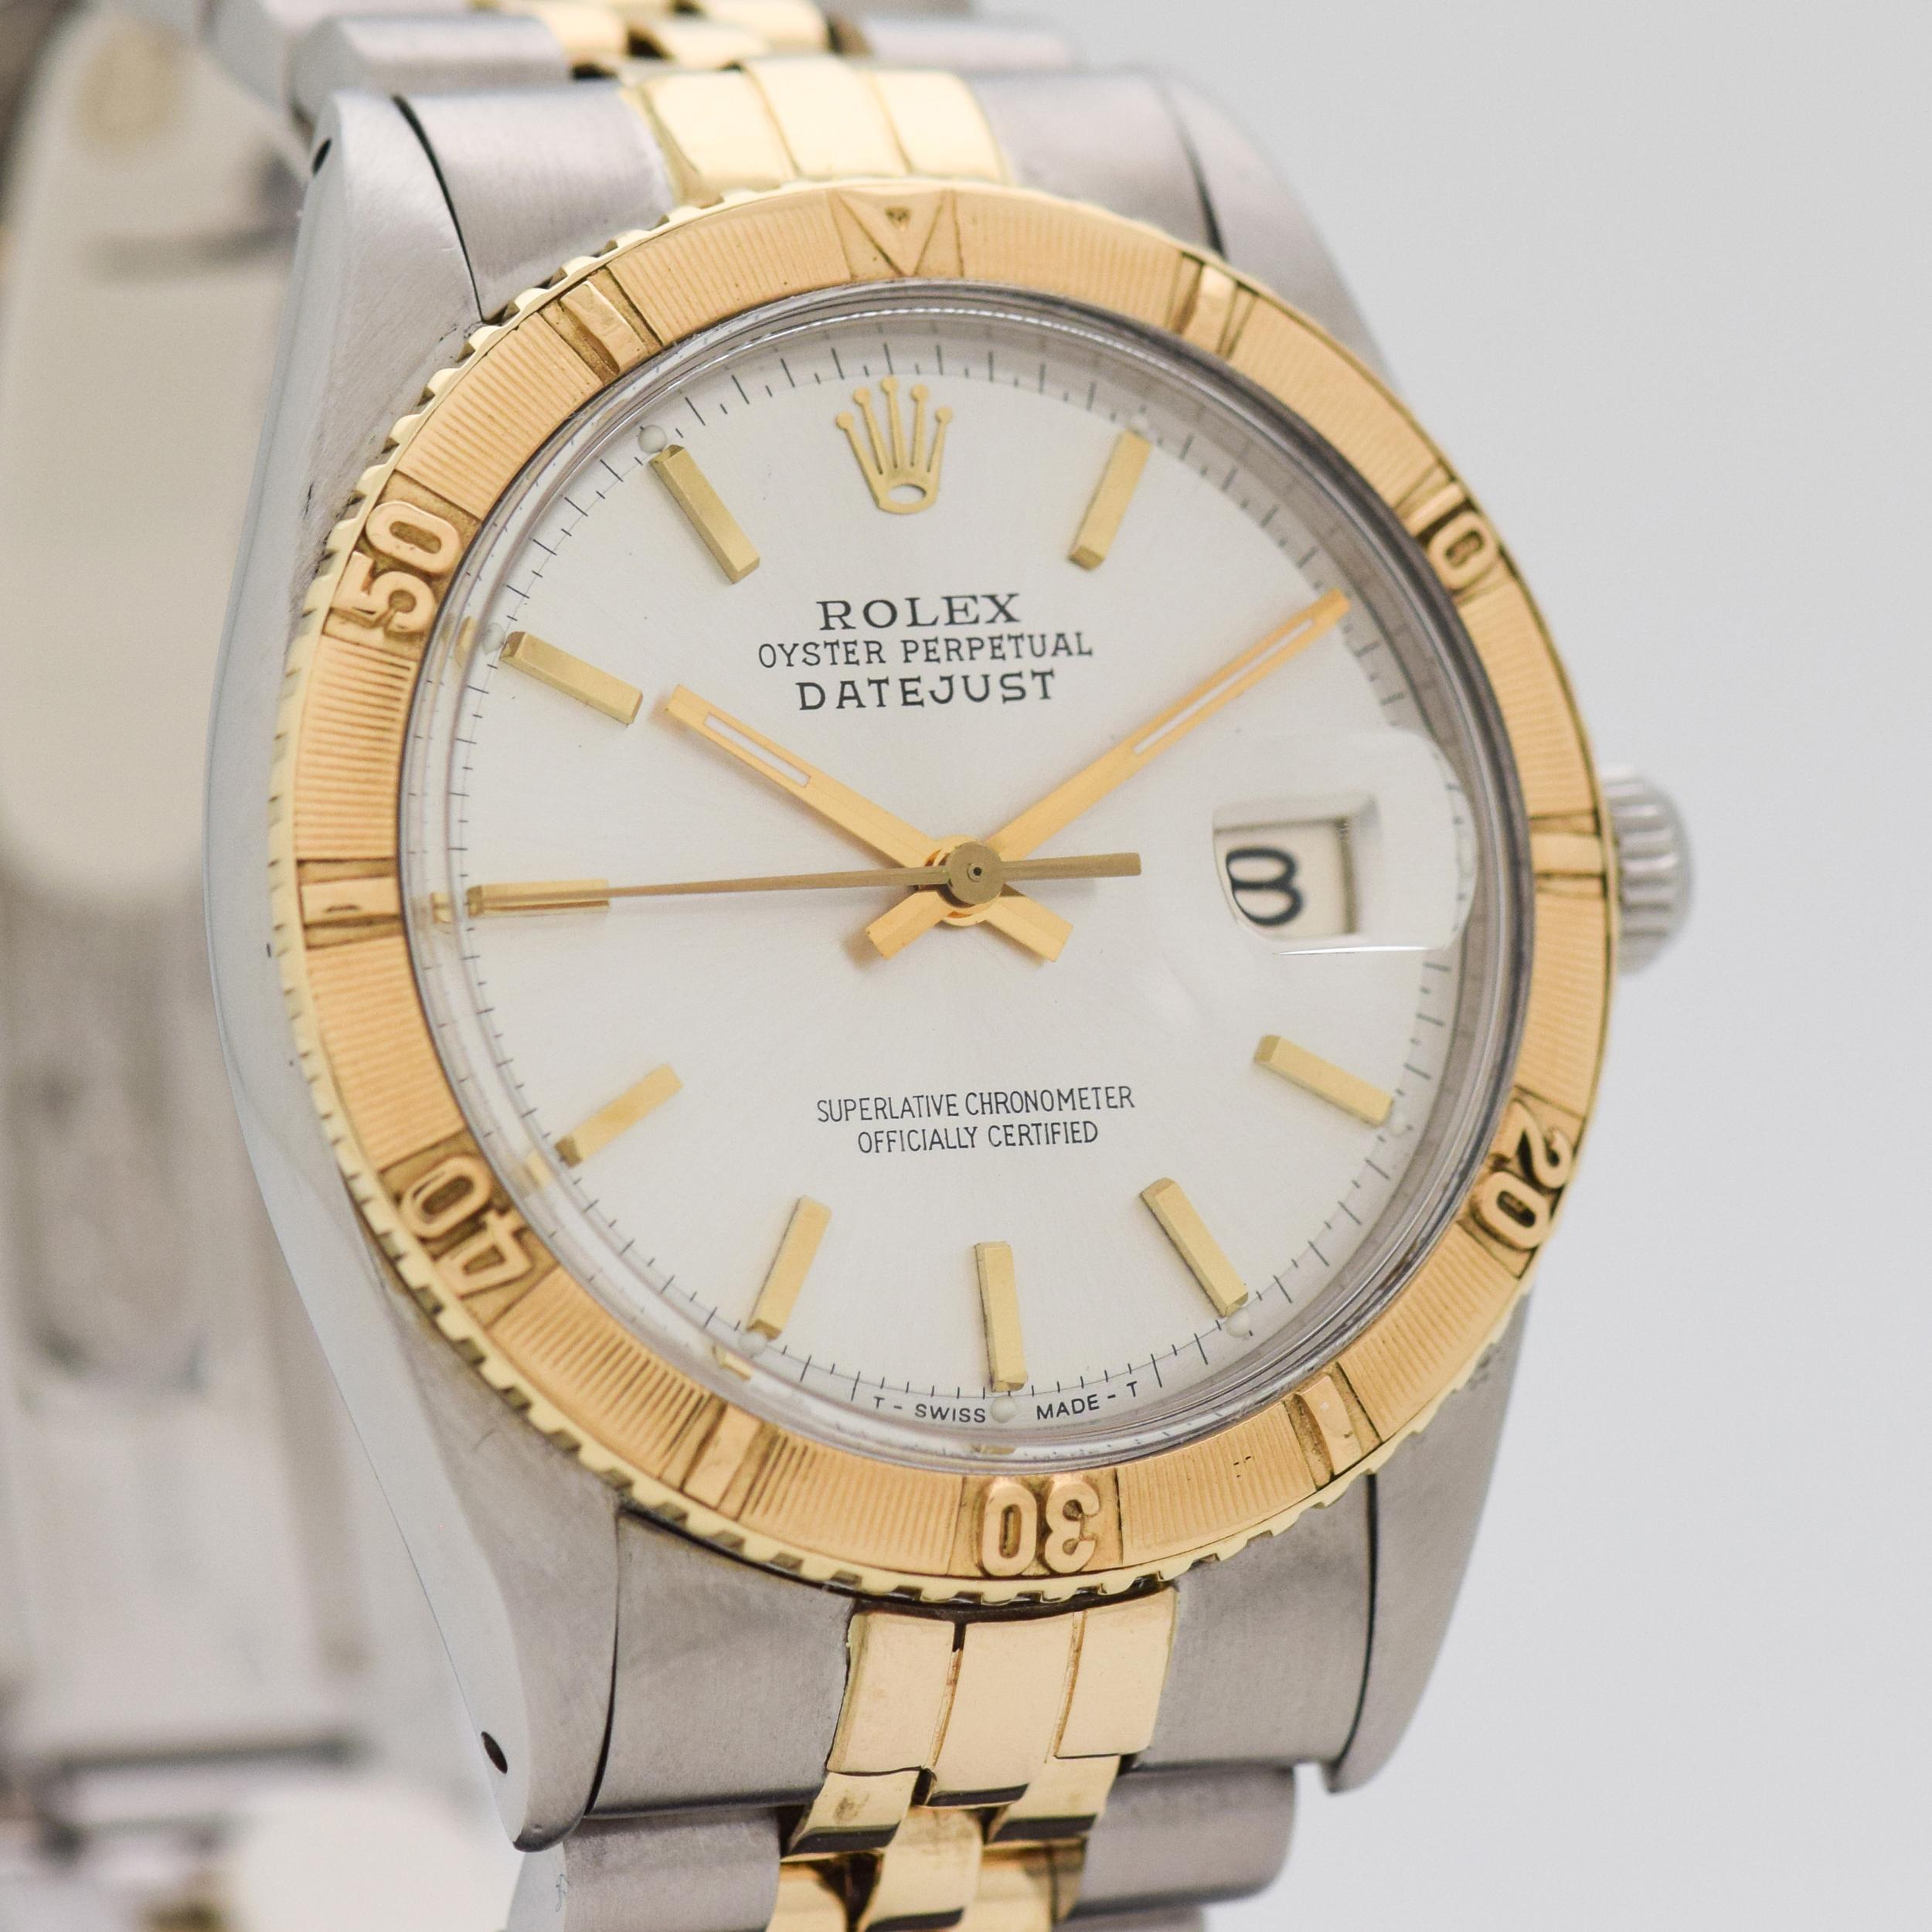 1967 Vintage Rolex Datejust Ref. 1625 with Two Tone 14k Yellow Gold Thunderbird Turn-O-Graph Bezel and Stainless Steel Case with Silver Dial with Applied Gold Stick/Bar/Baton Markers with Newer D Link Genuine Rolex Two Tone 14k Yellow Gold and